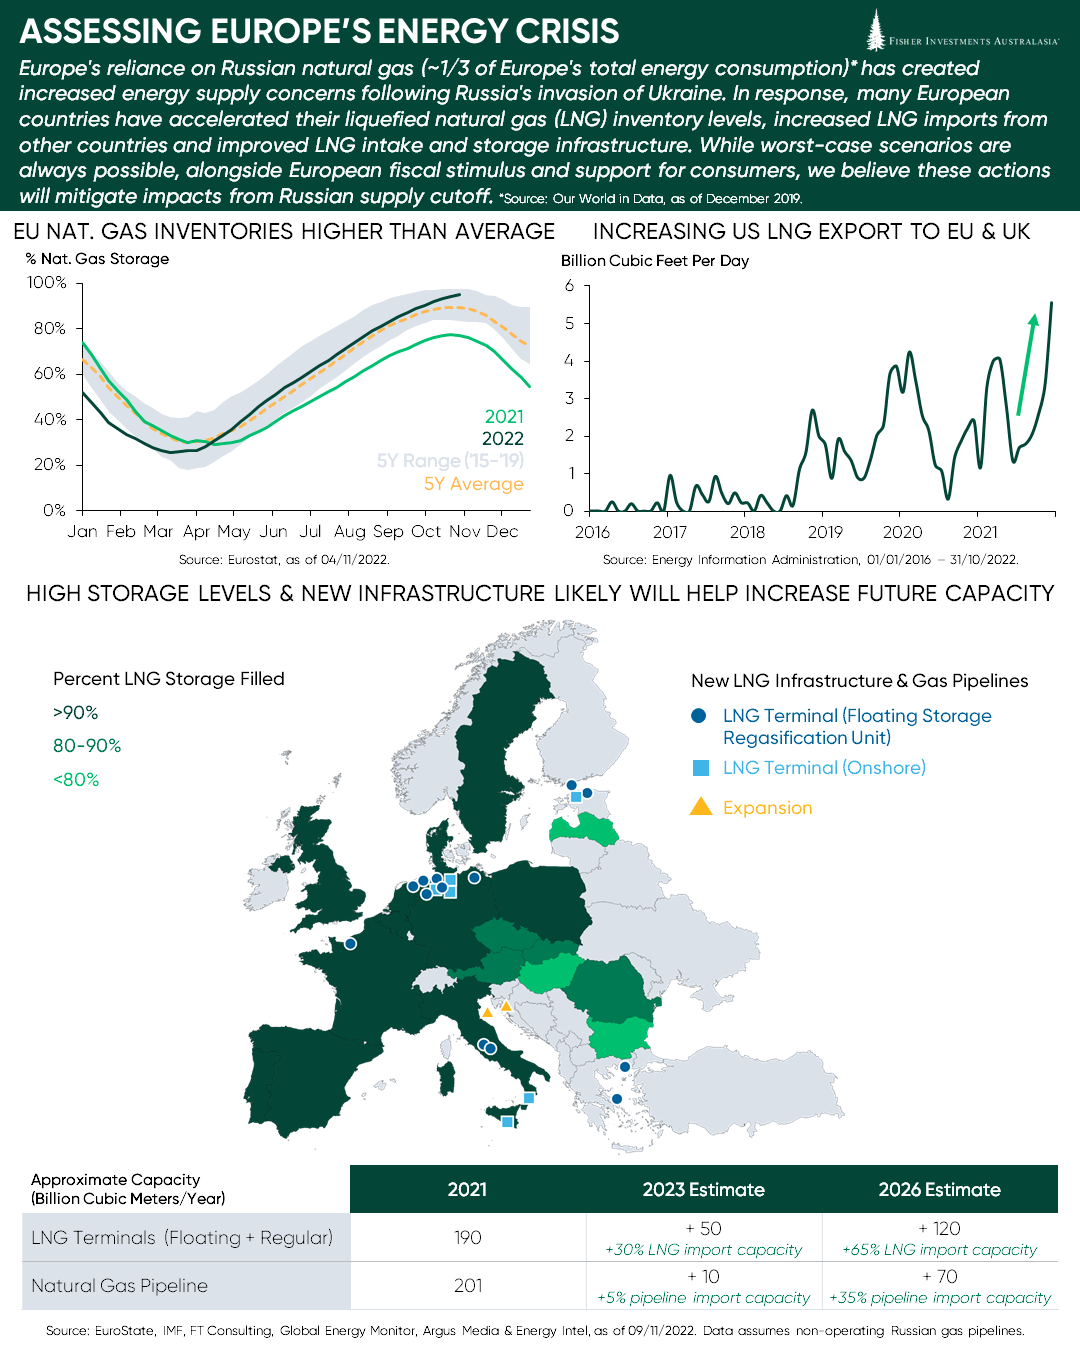 Assessing Europe’s Energy Crisis Infographic